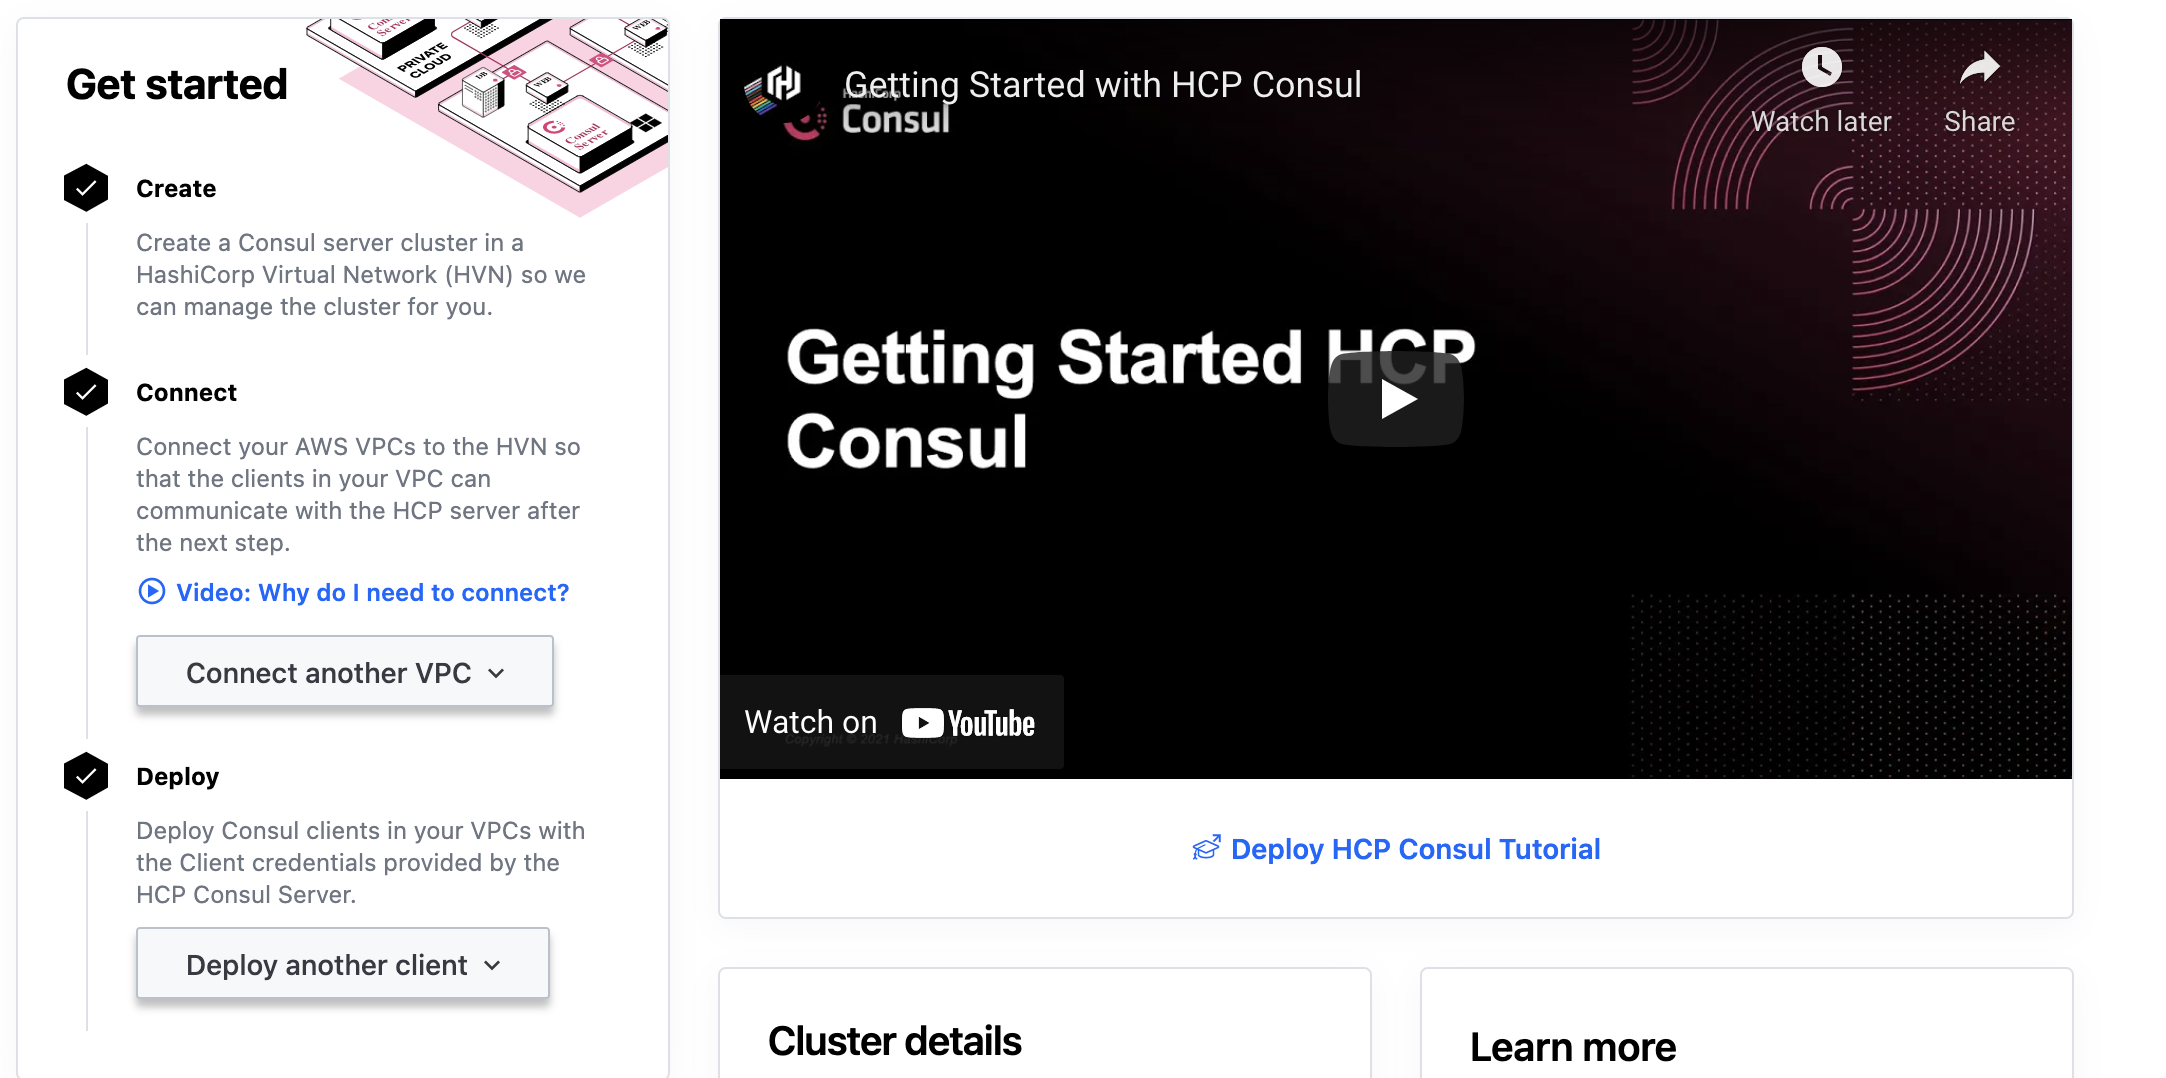 Get started HCP Consul page.